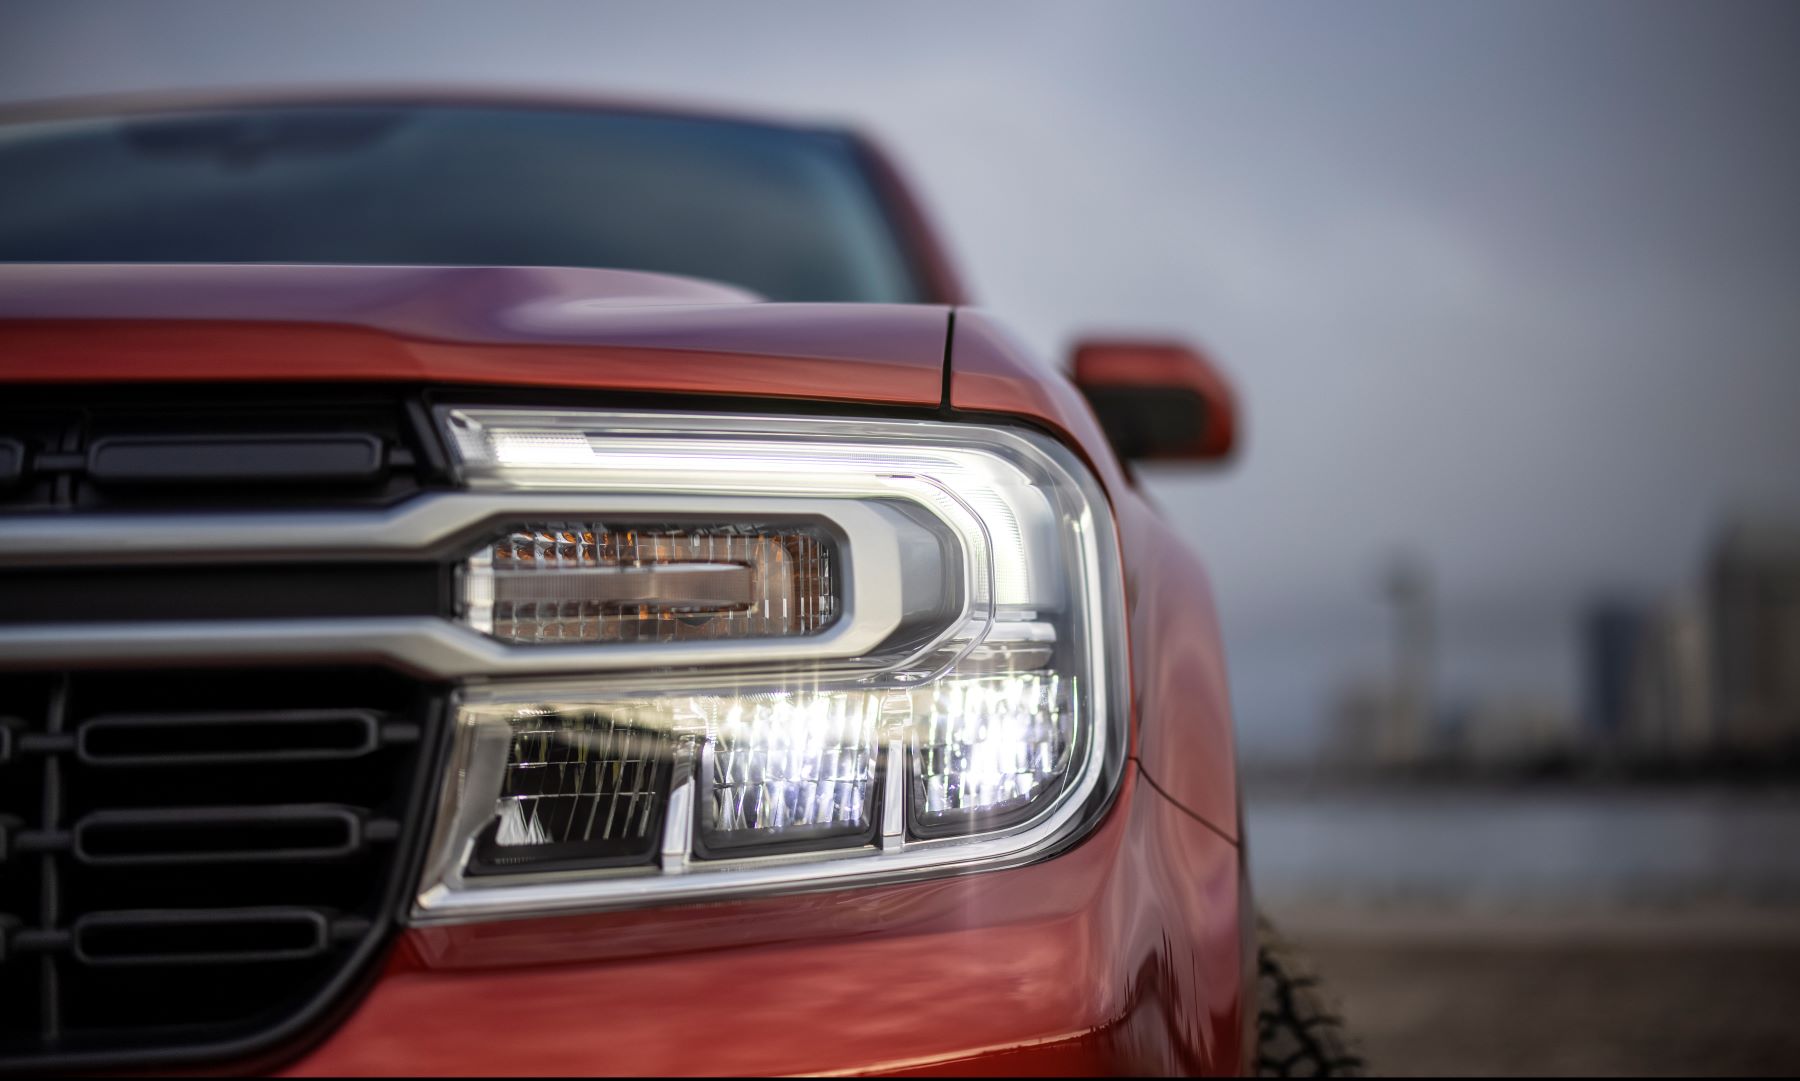 A closeup shot of a red-orange 2022 Ford Maverick Lariat compact pickup truck's headlights and grille